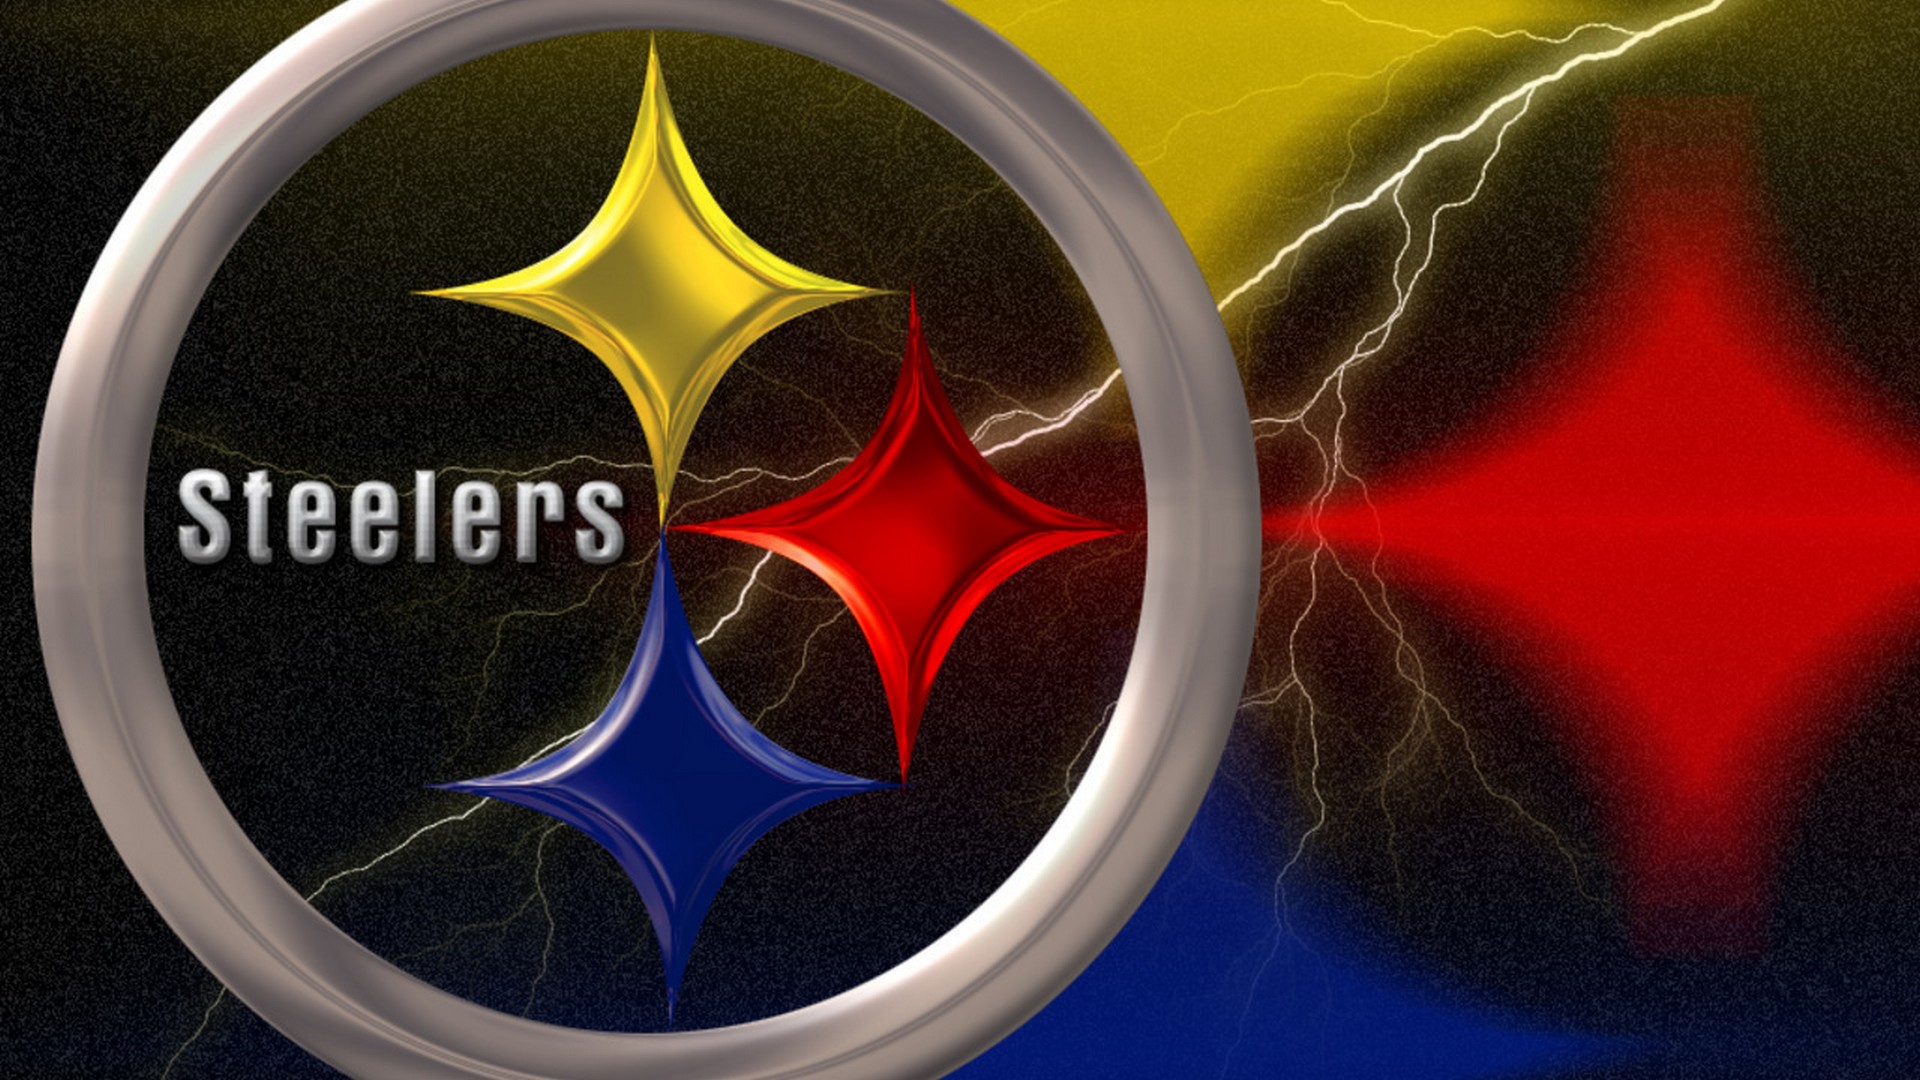 Steelers Football HD Wallpapers With Resolution 1920X1080 pixel. You can make this wallpaper for your Mac or Windows Desktop Background, iPhone, Android or Tablet and another Smartphone device for free